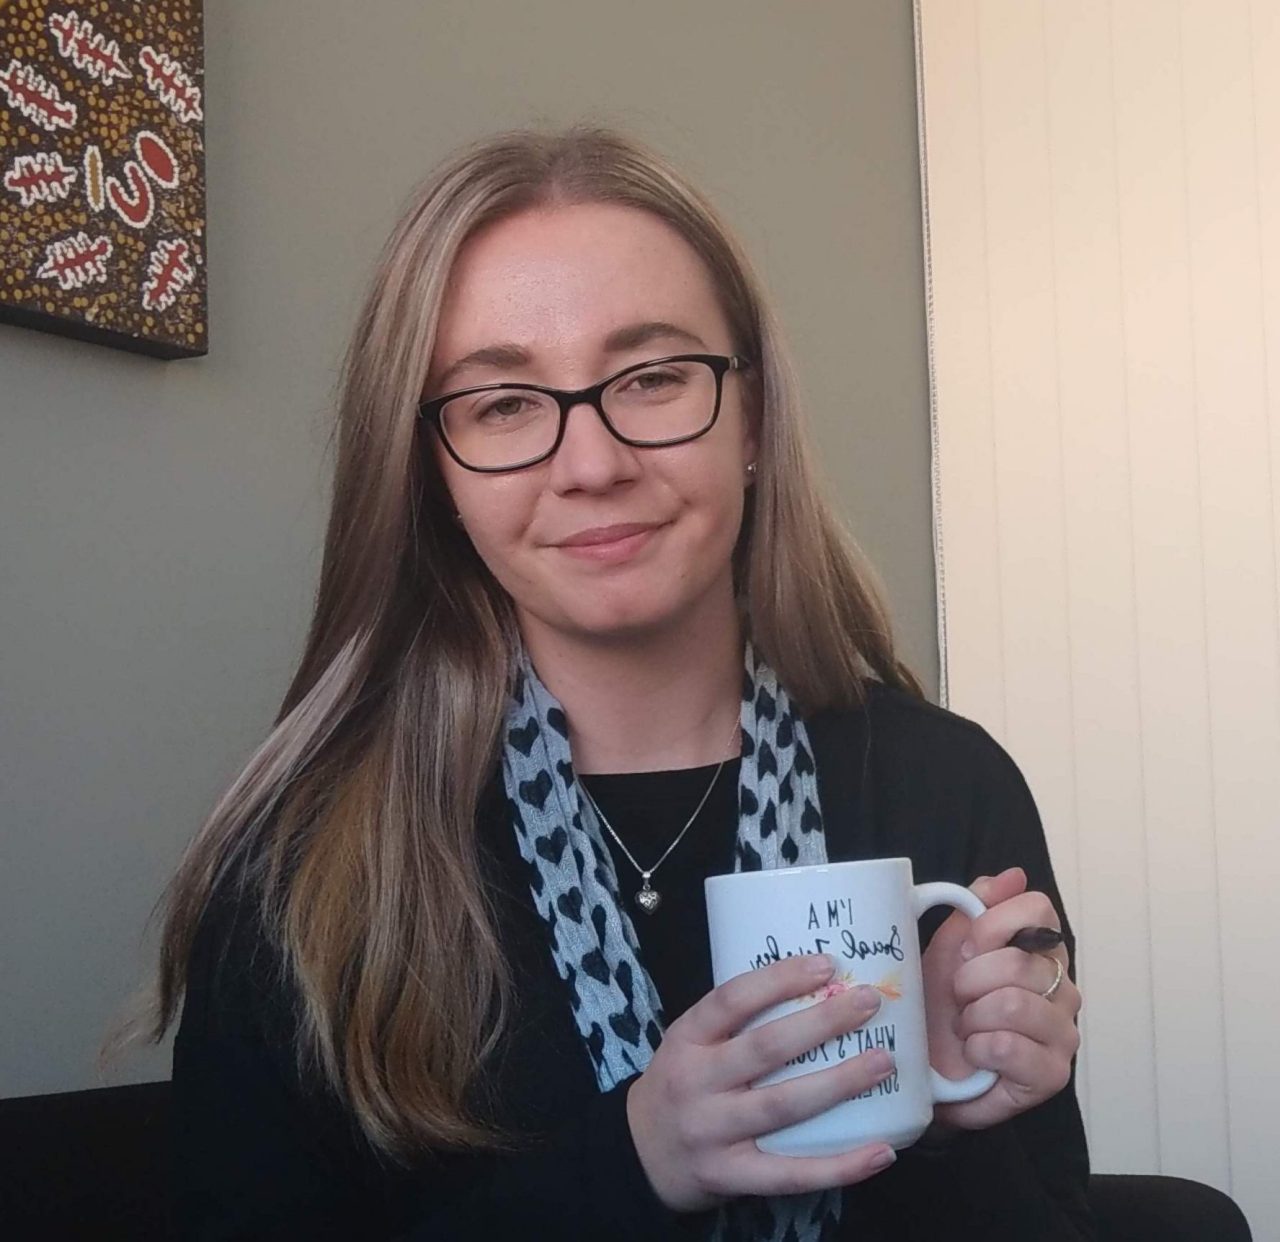 Emily Olley sits in an office holding a coffee mug.